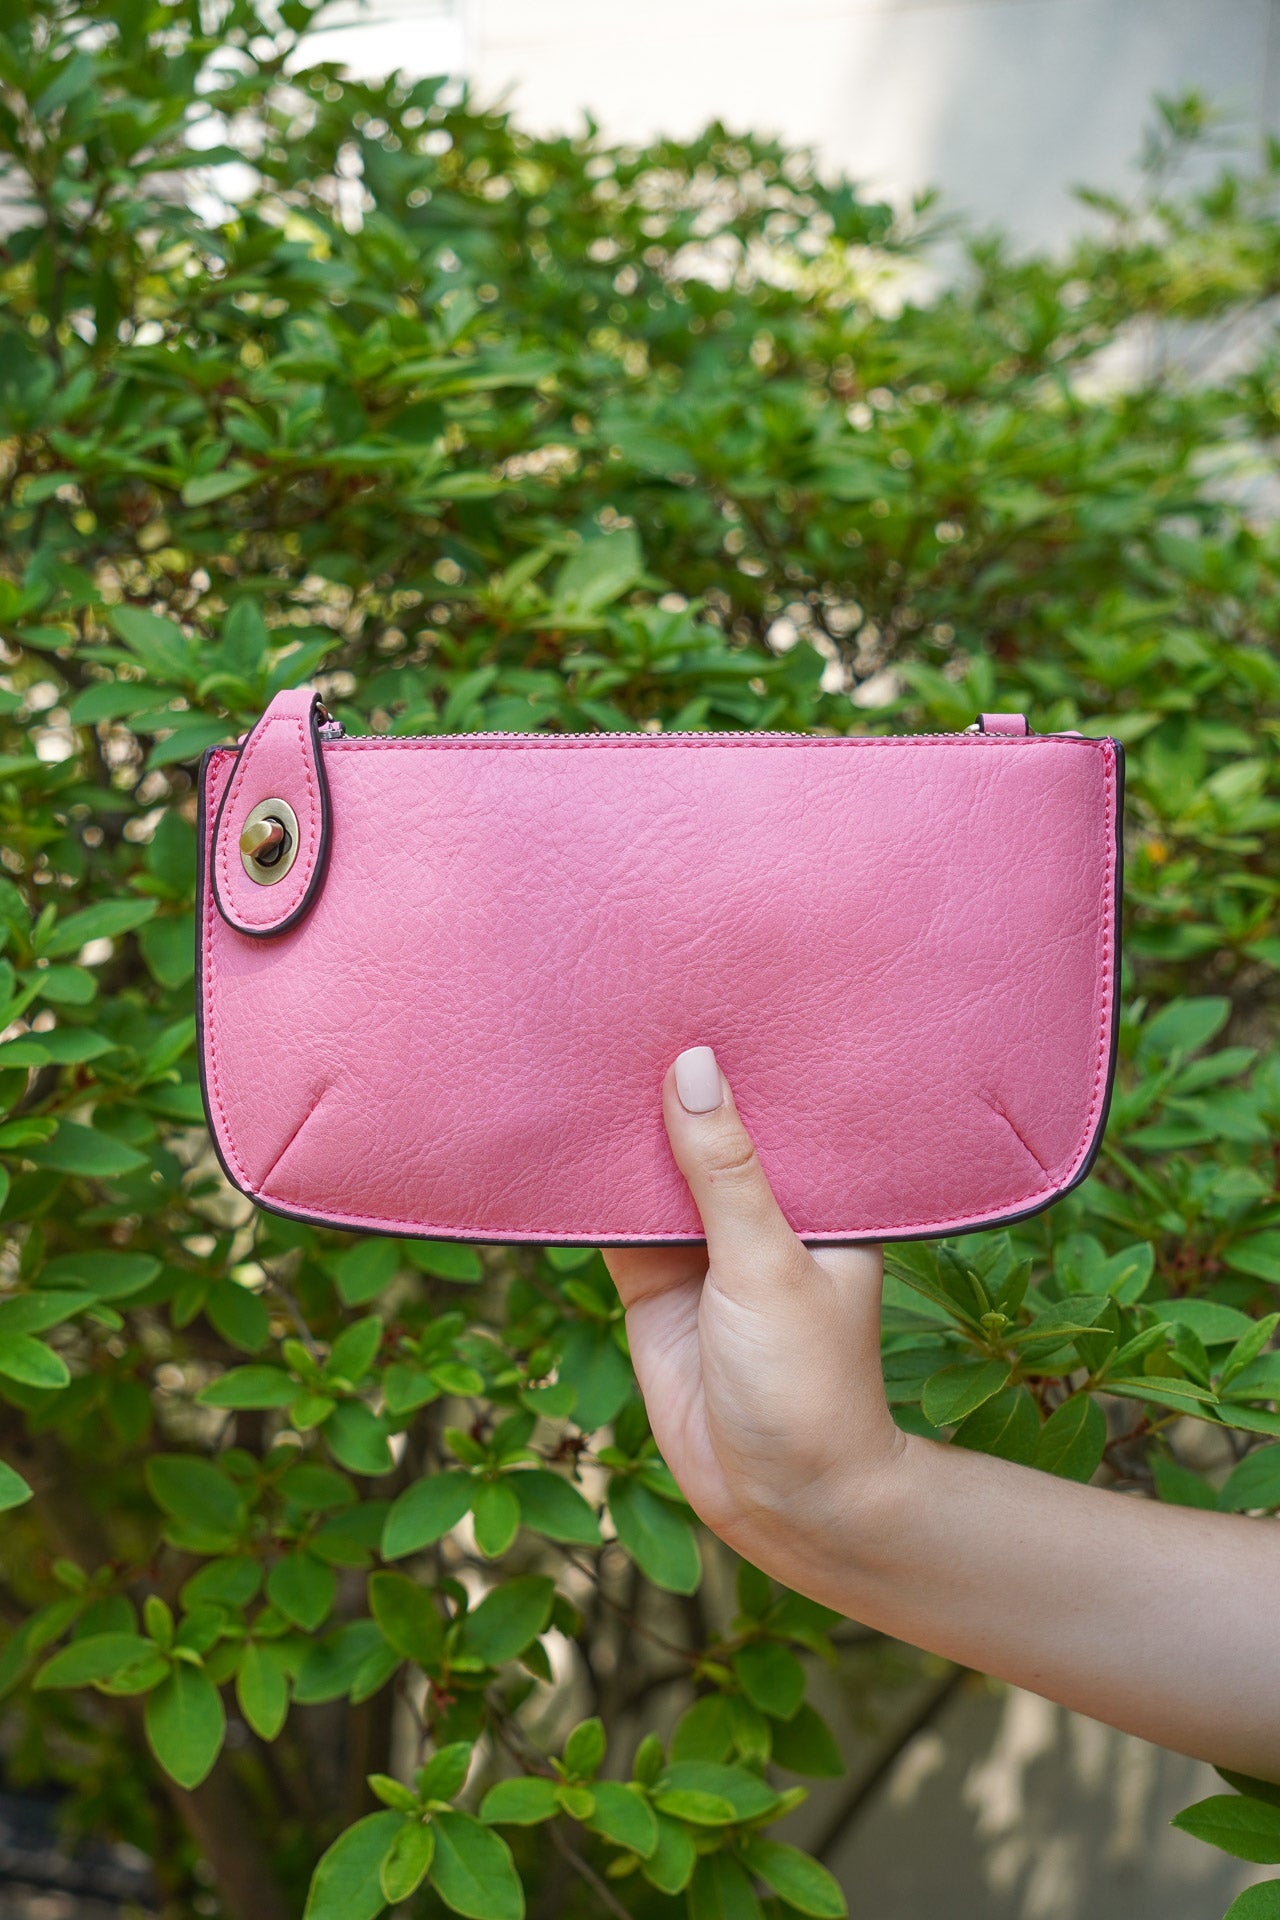 photo shows a pink crossbody/ wristlet in front of greenery.